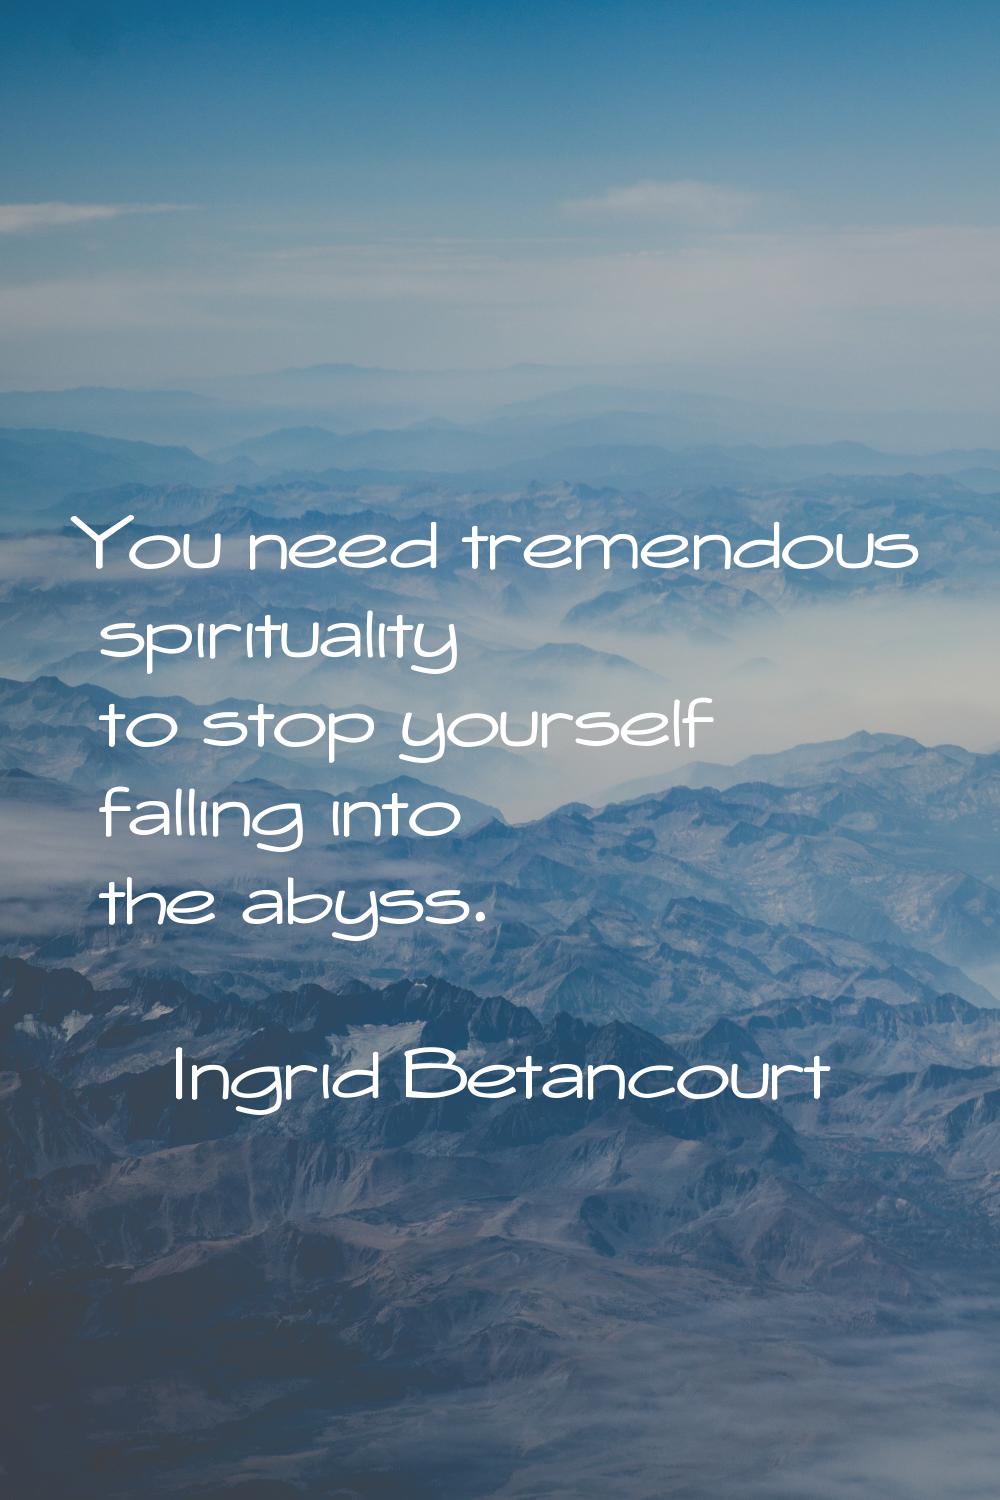 You need tremendous spirituality to stop yourself falling into the abyss.